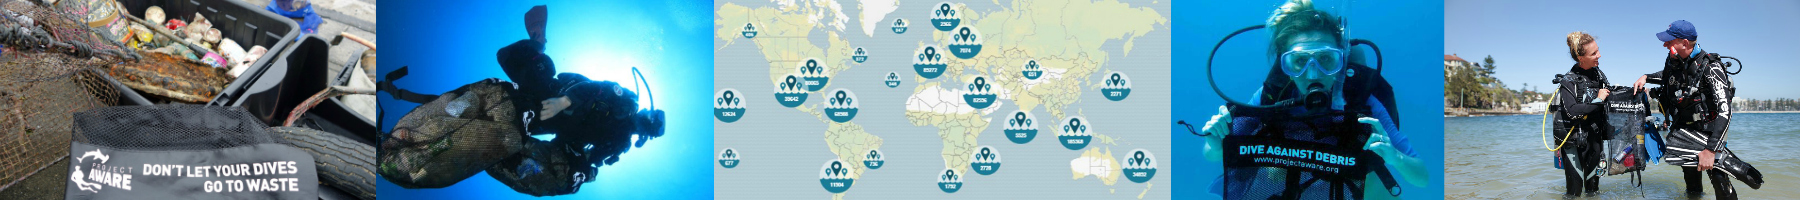 Addressing  the global marine debris crisis from an underwater perspective  - citizen science and community engagement for global solution